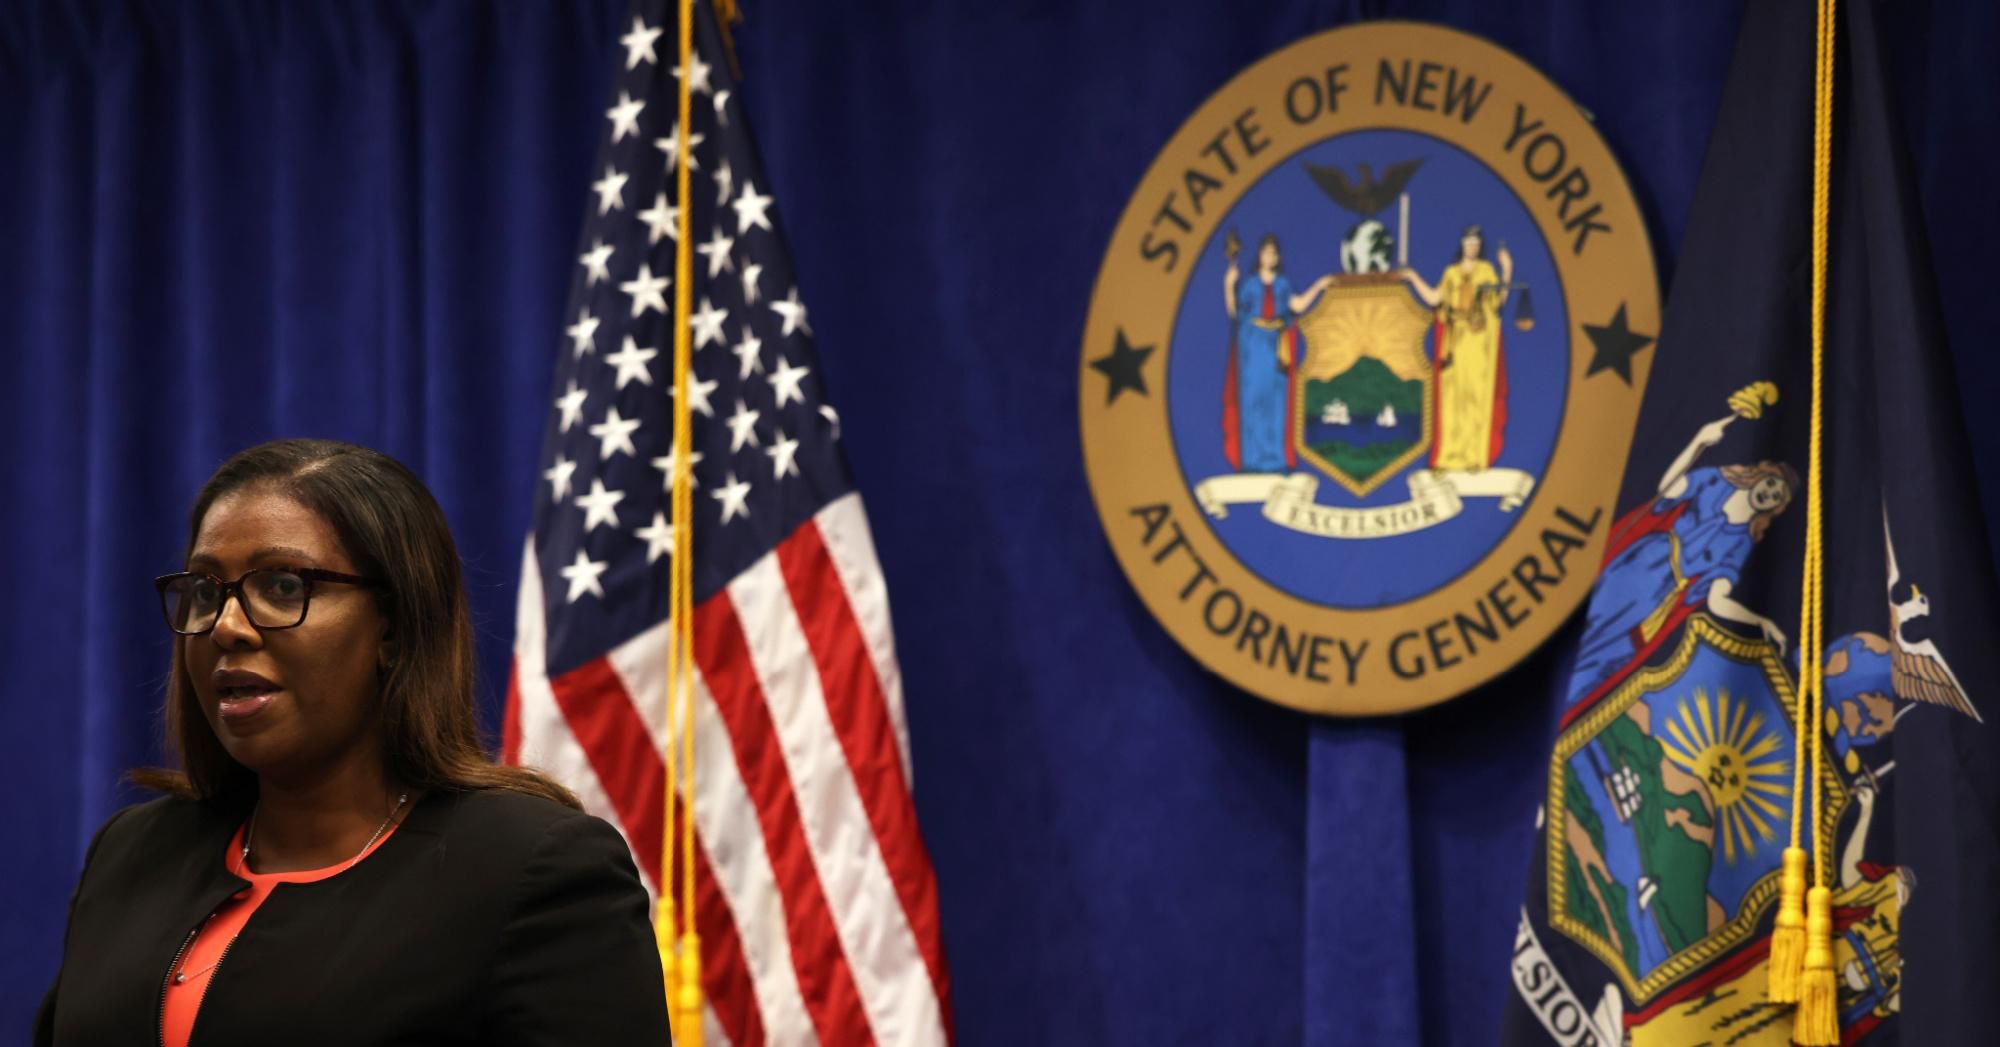 New York Attorney General Letitia James speaks during a press conference announcing a lawsuit to dissolve the NRA on August 6, 2020 in New York City. (Photo: Michael M. Santiago via Getty Images)